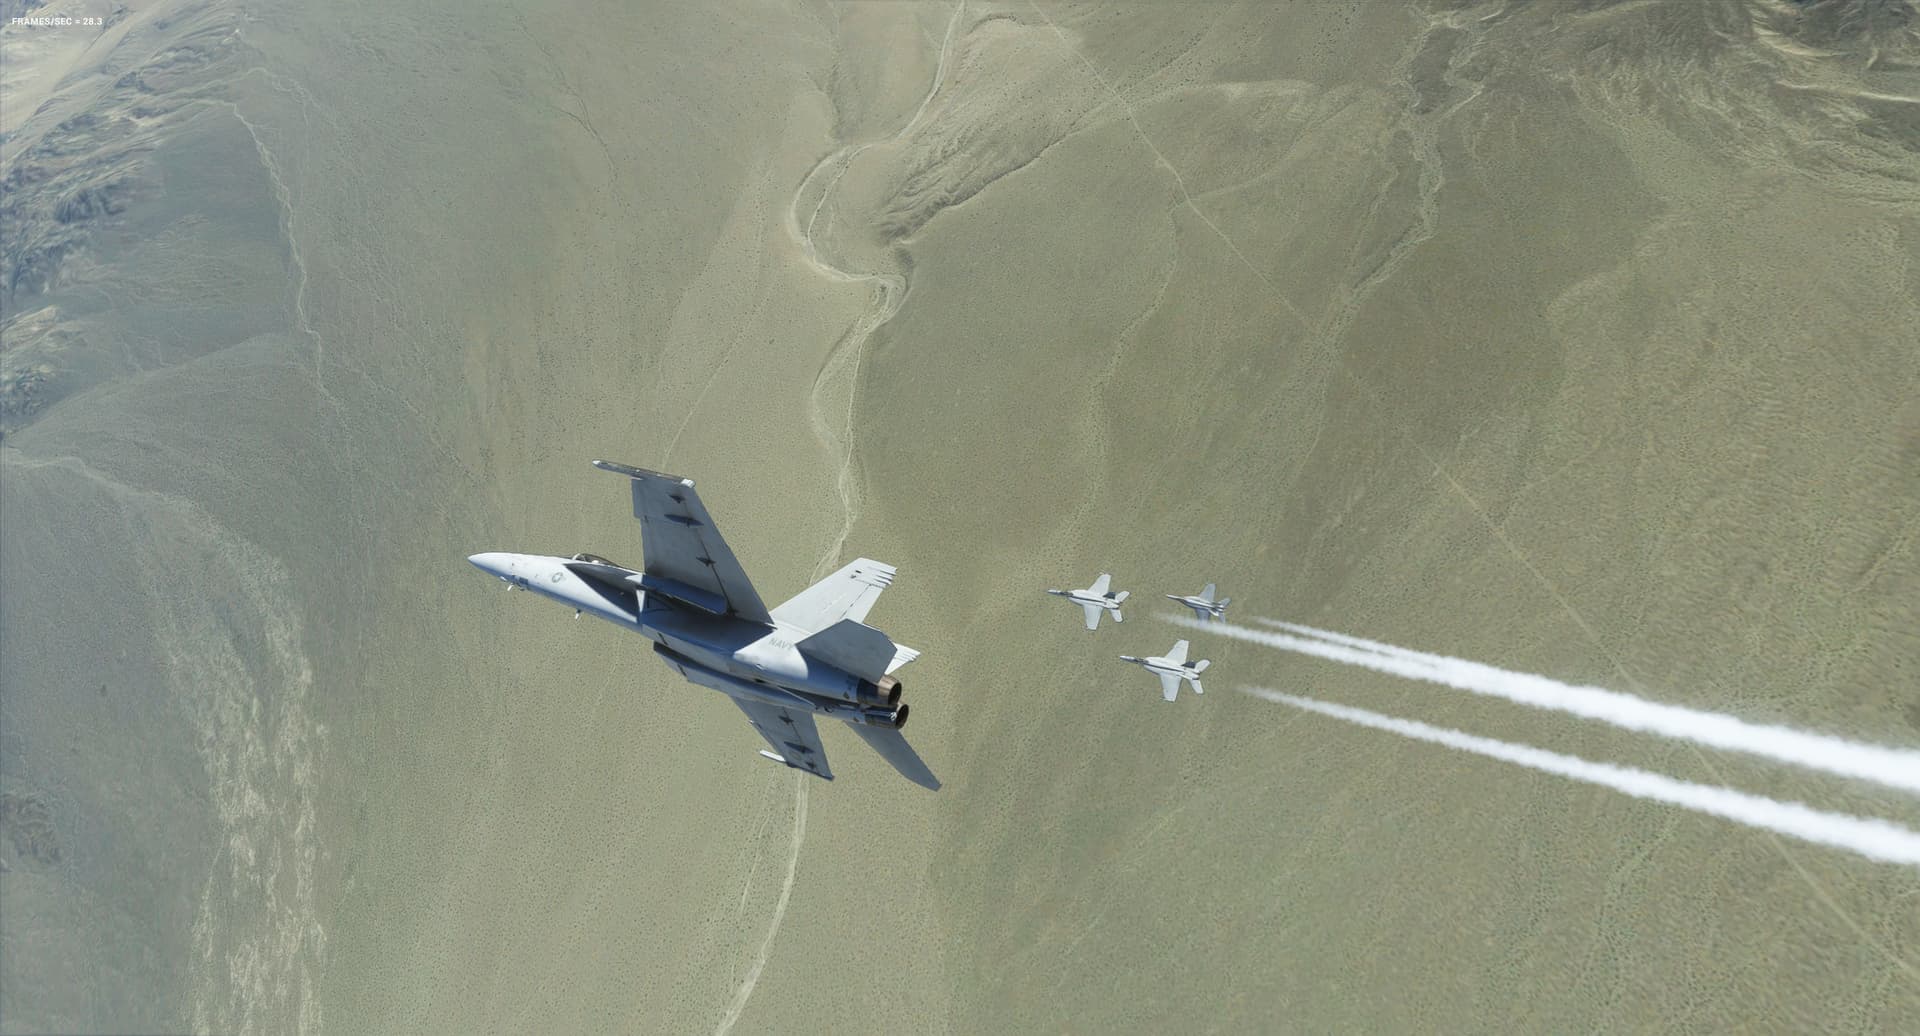 An F/A-18 Hornet flies inverted over the top of three other Hornets in close formation with one another.